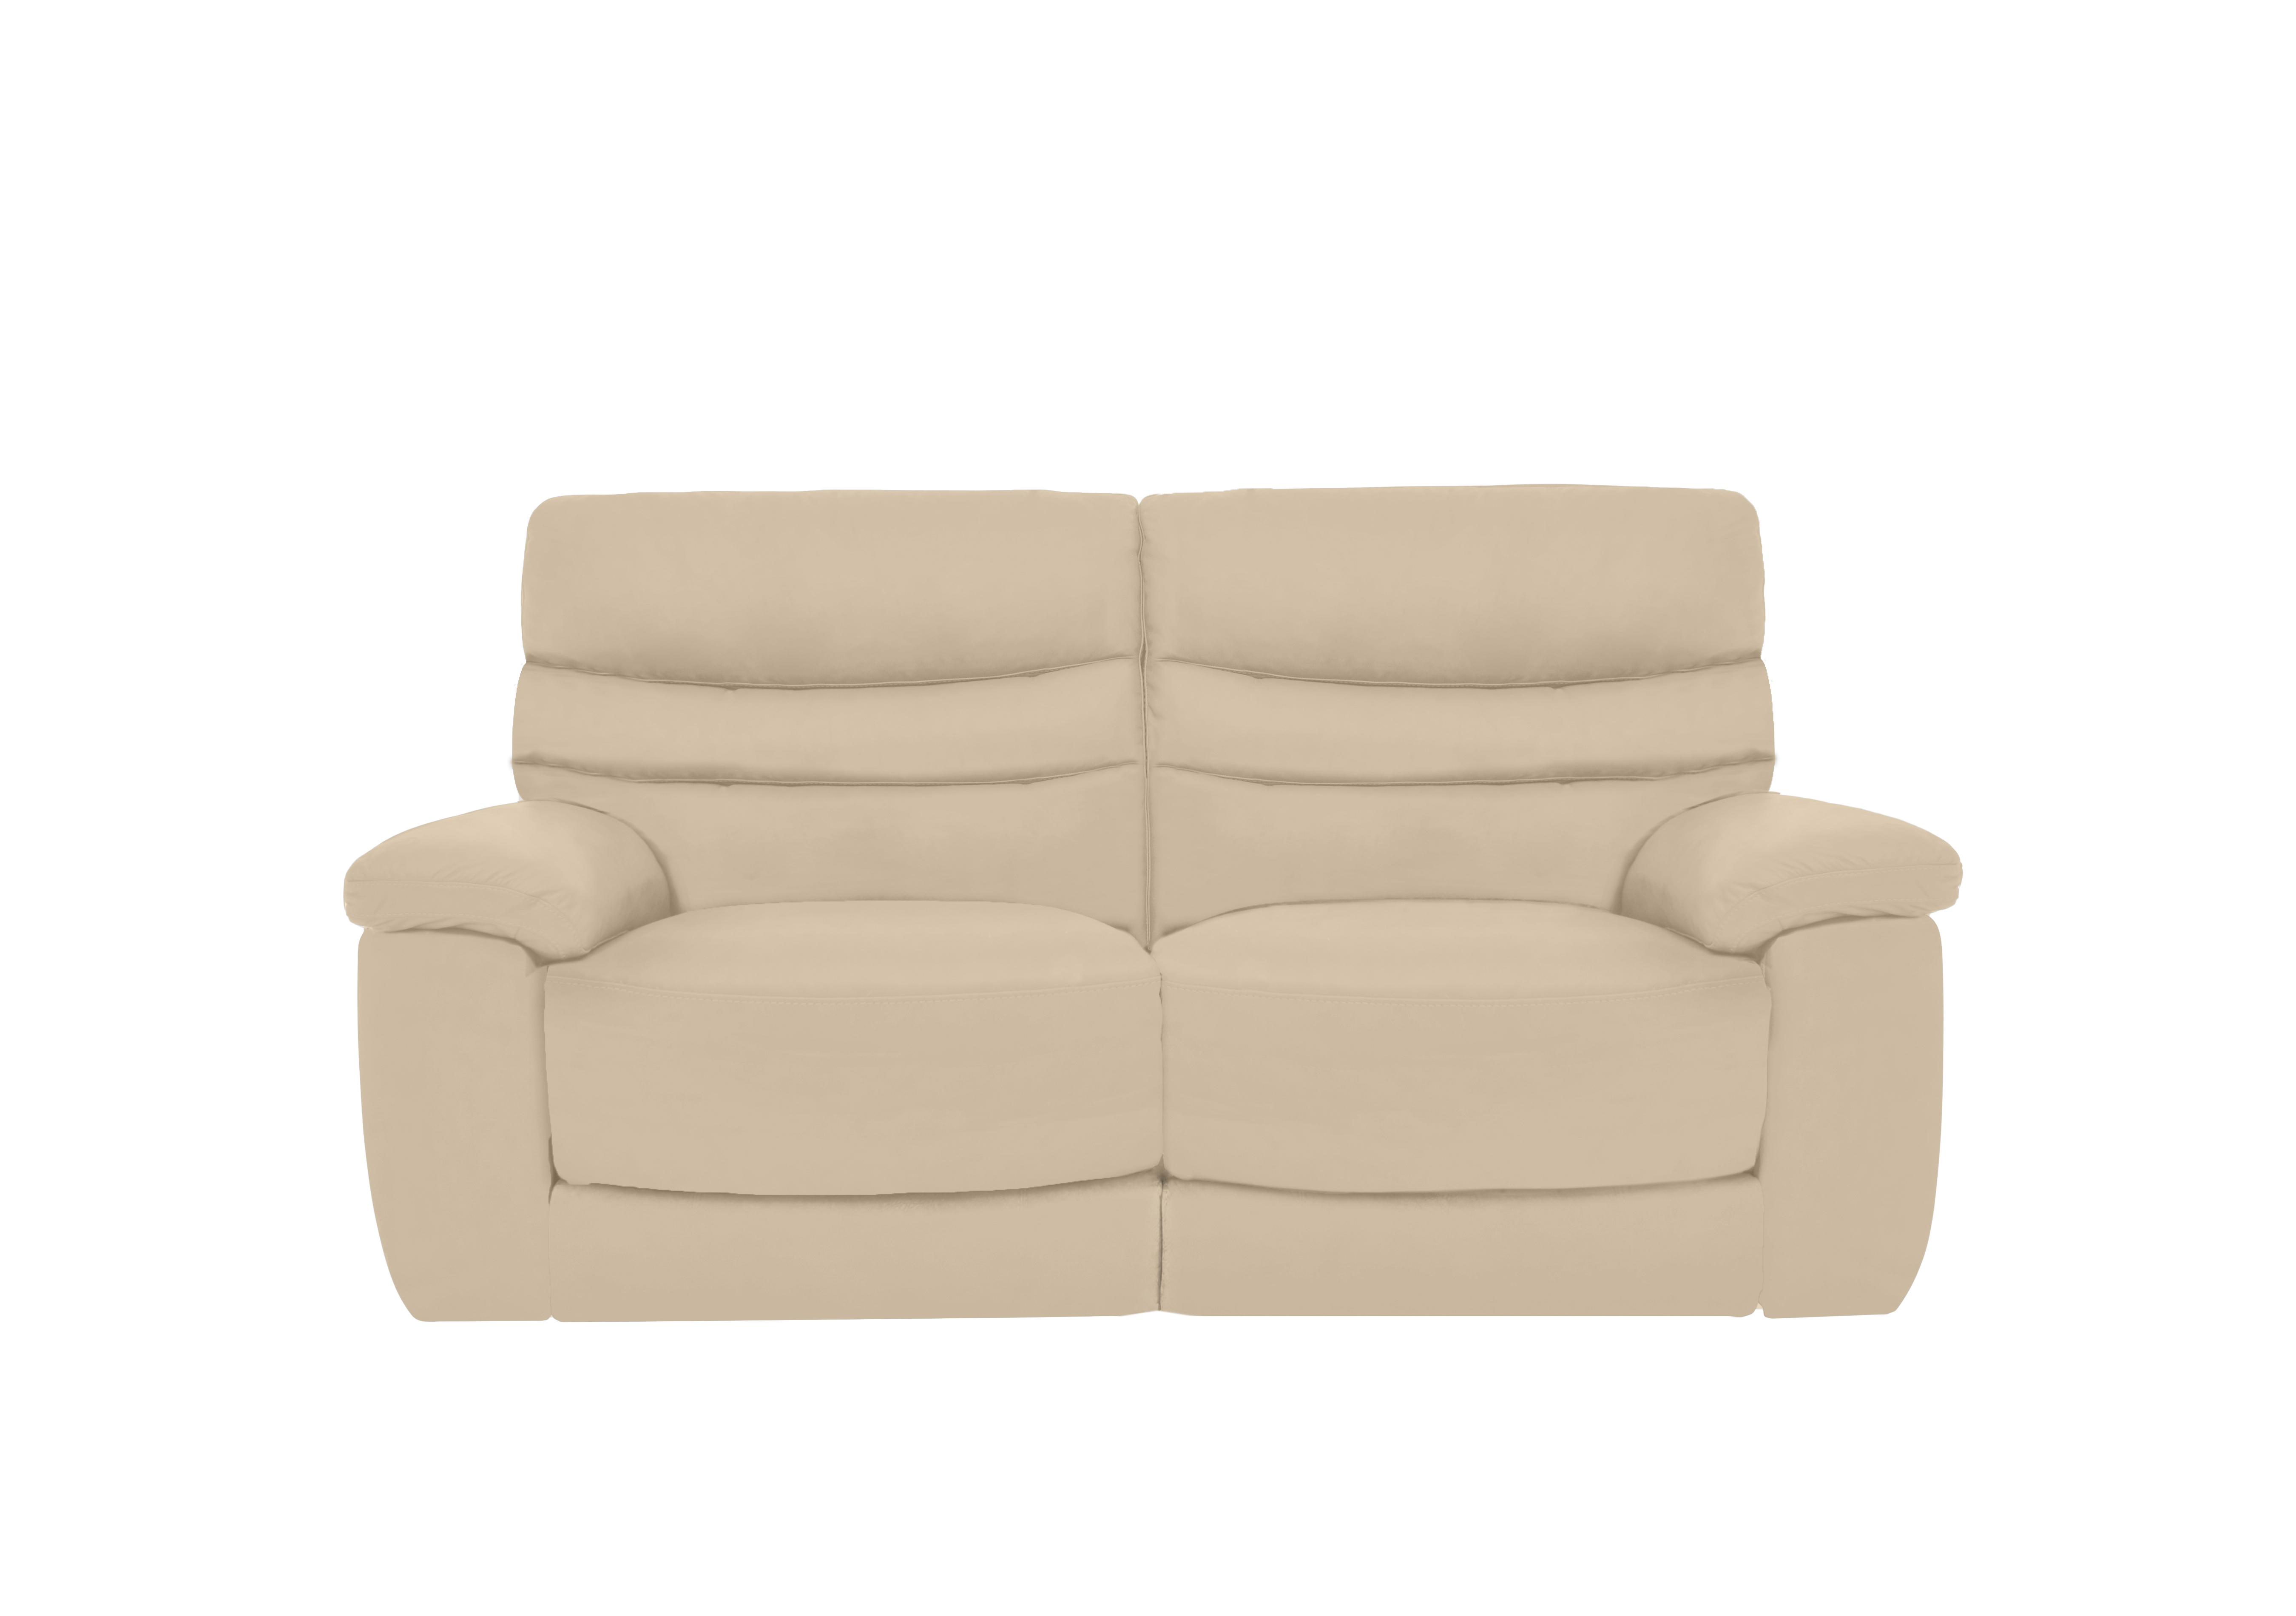 Nimbus 2 Seater Leather Power Recliner Sofa with Power Headrests in Bx-862c Bisque on Furniture Village